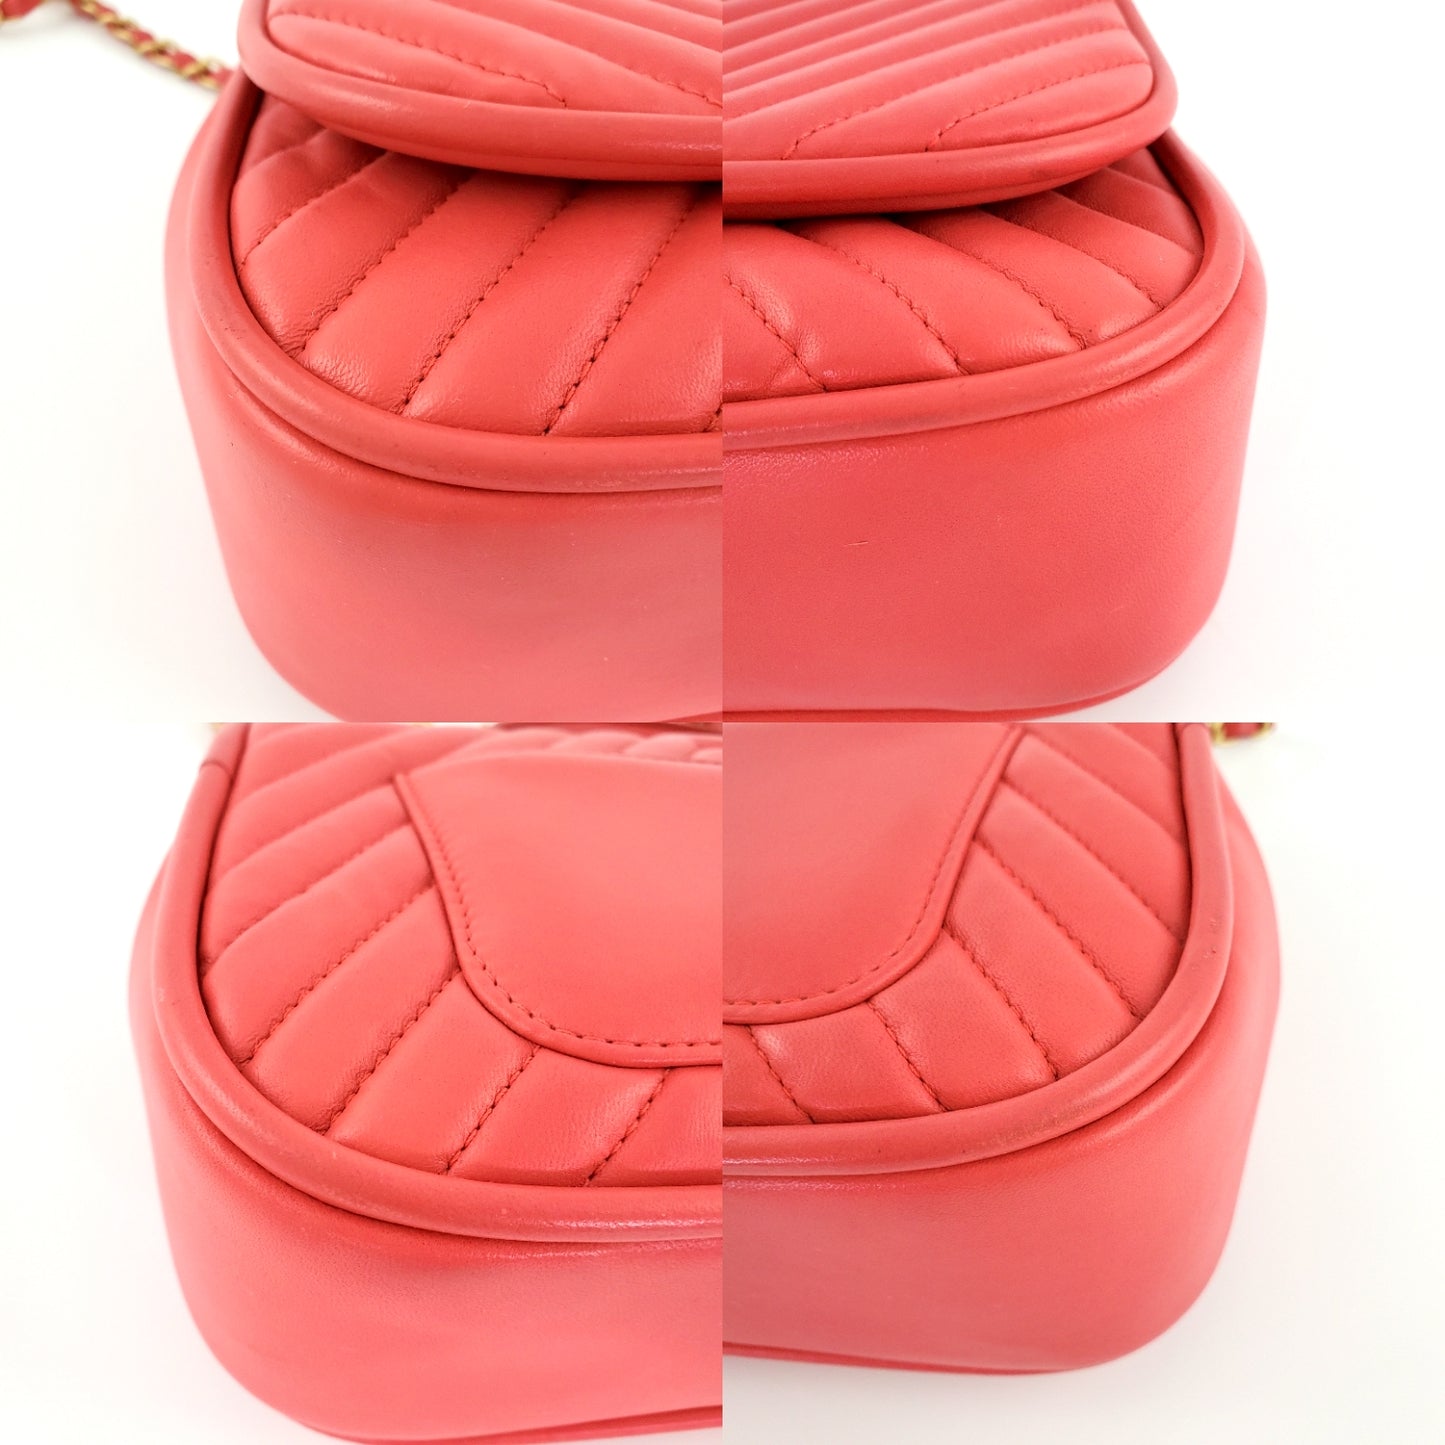 Chanel Red Reverse Chevron Quilted Round Top Handle Flap Bag